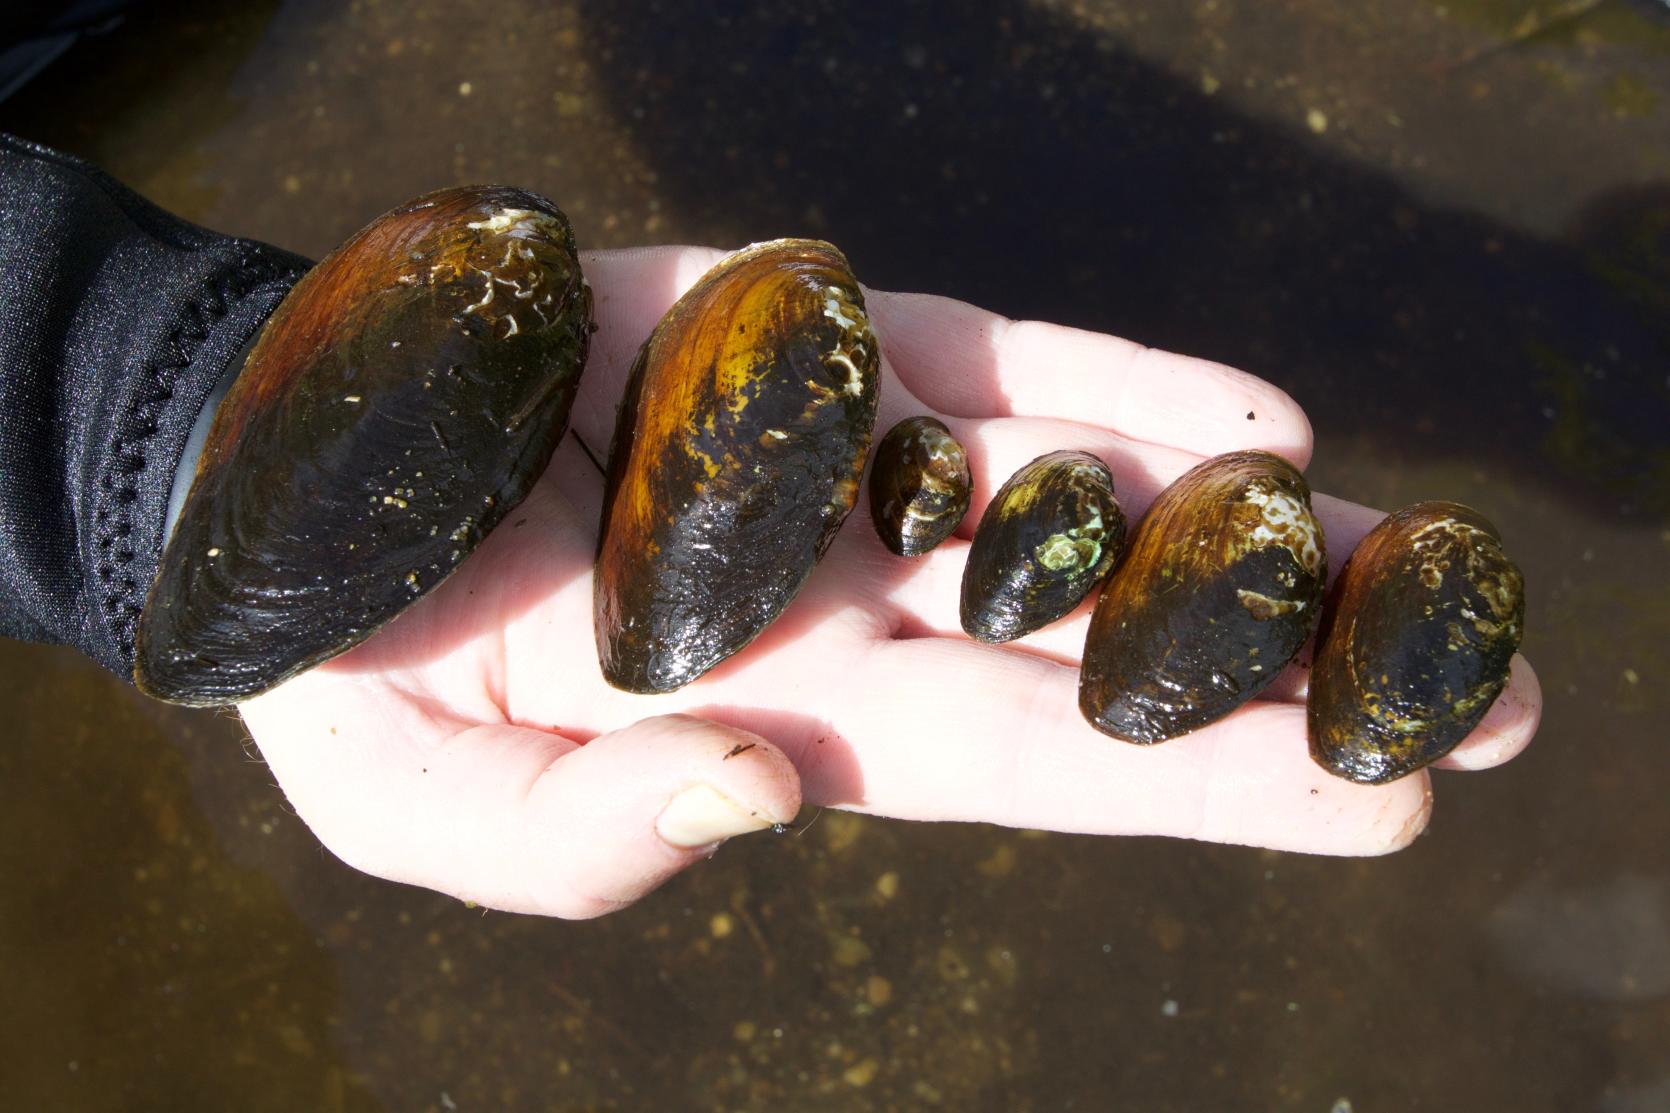 Six freshwater mussels displayed on a hand.